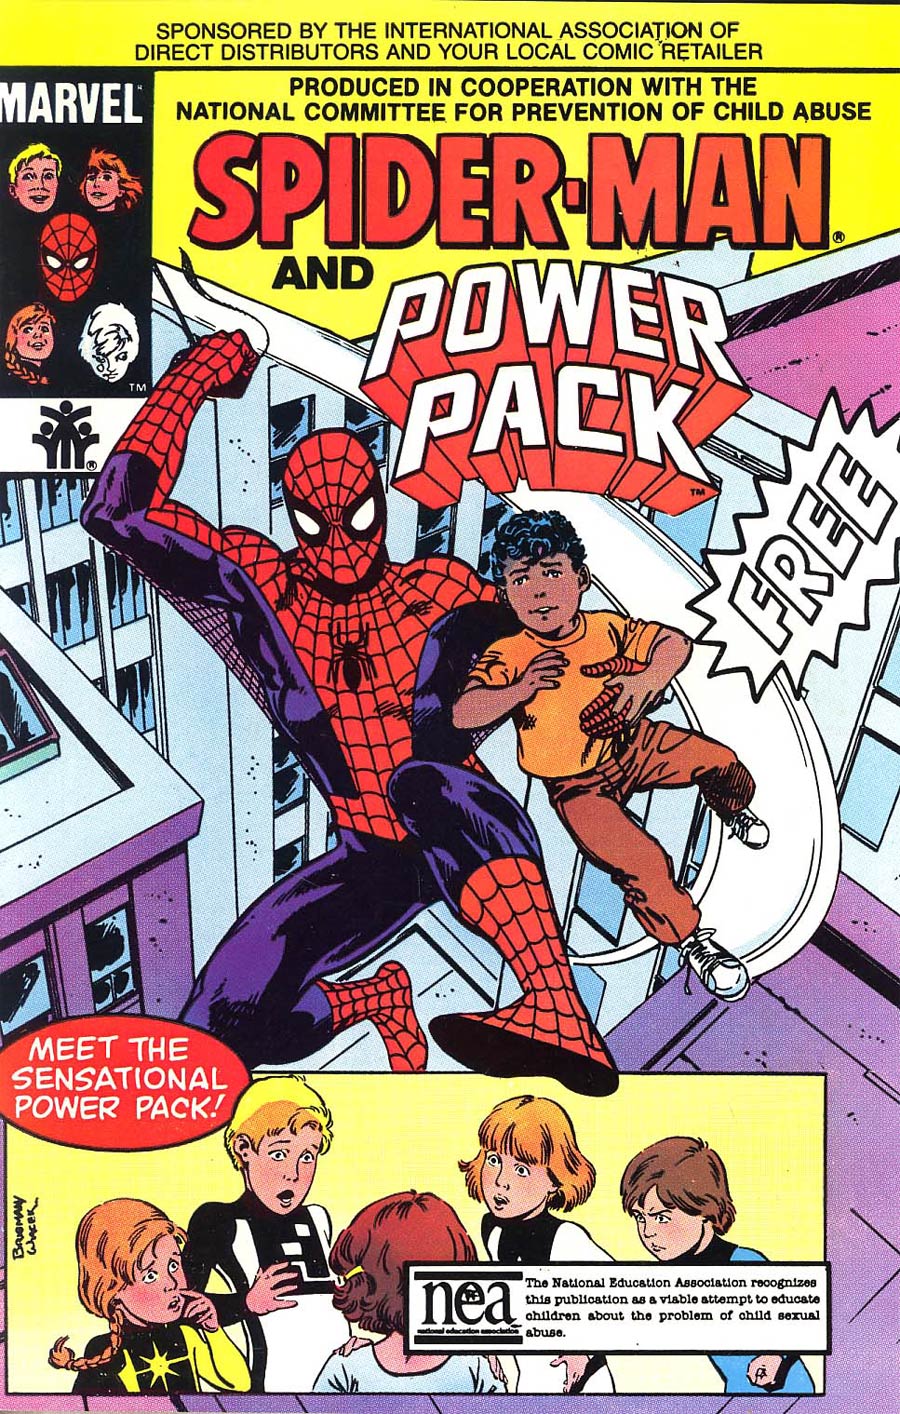 Amazing Spider-Man And Power Pack Prevent Child Abuse Cover A Store Giveaway